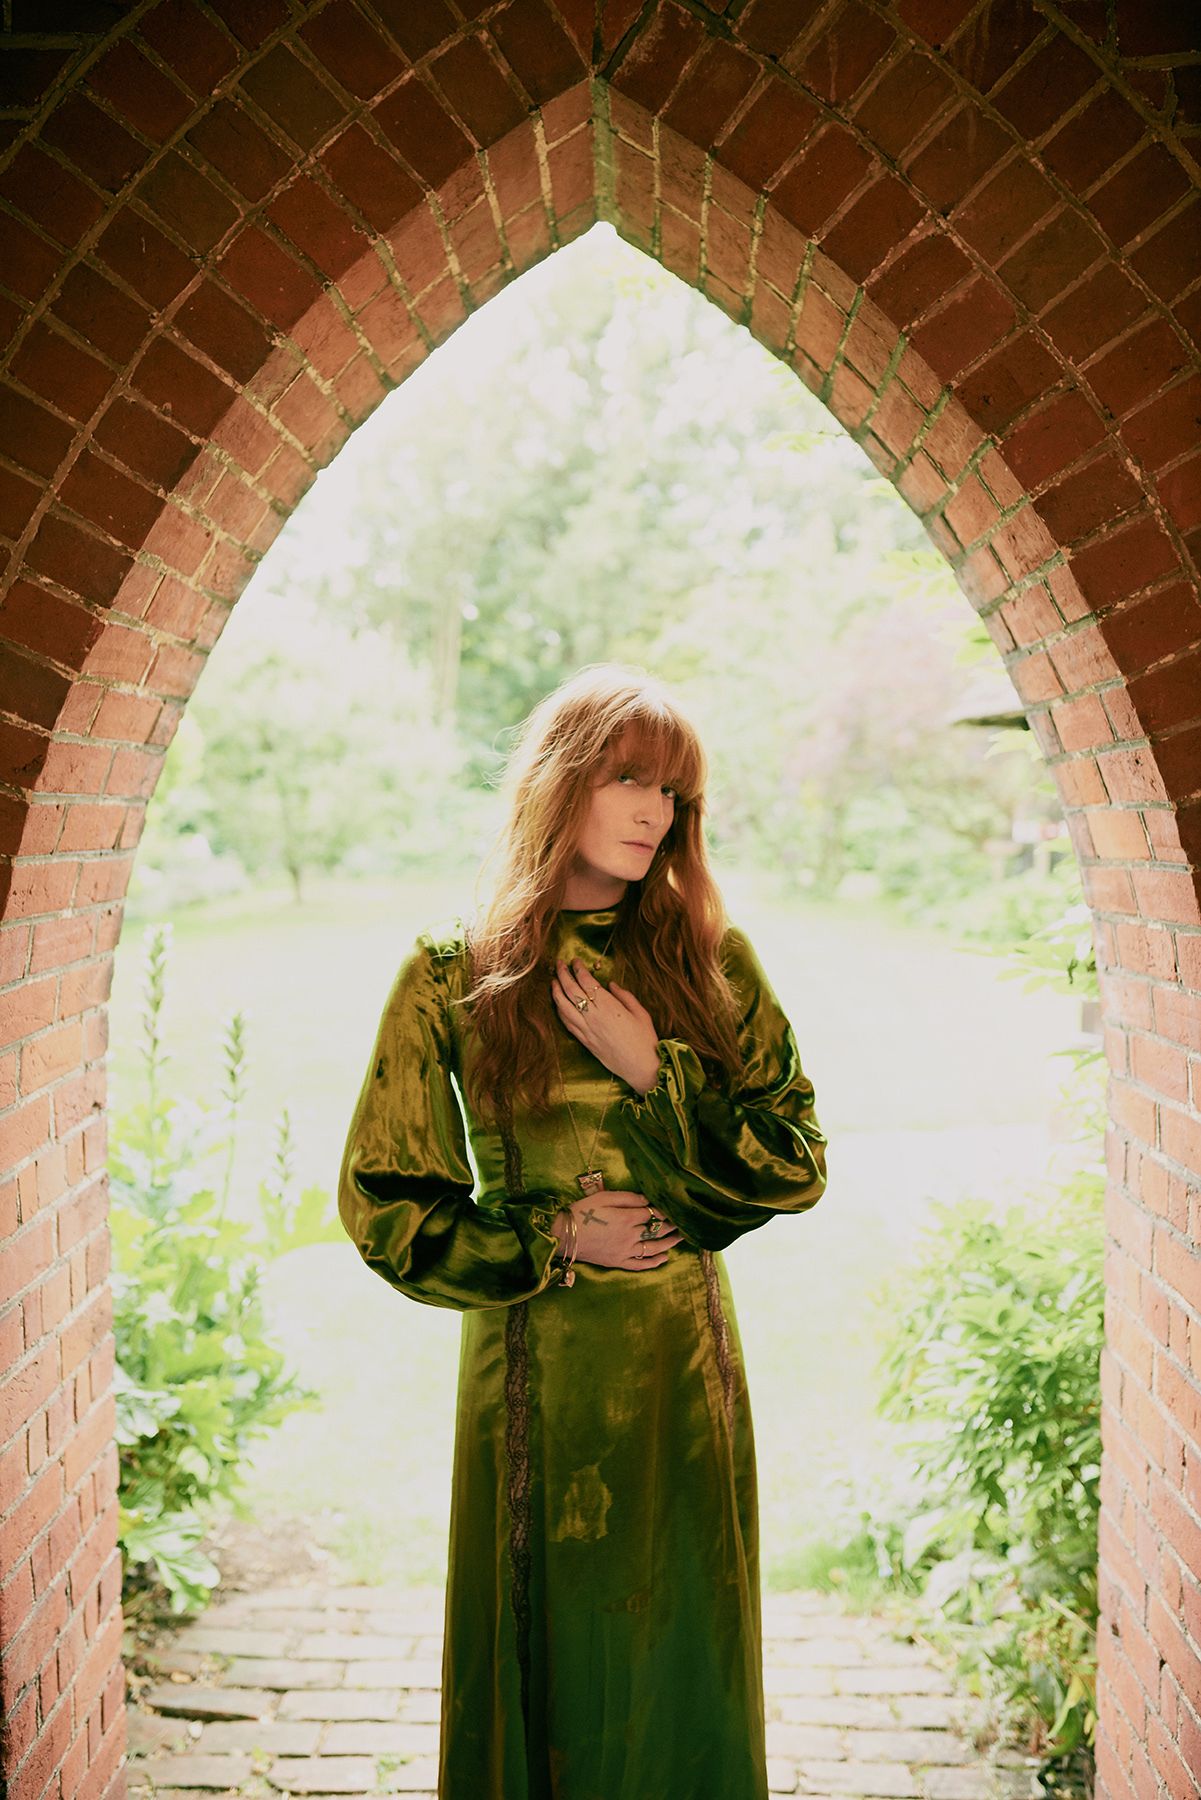 Pictures florence welch Florence Welch